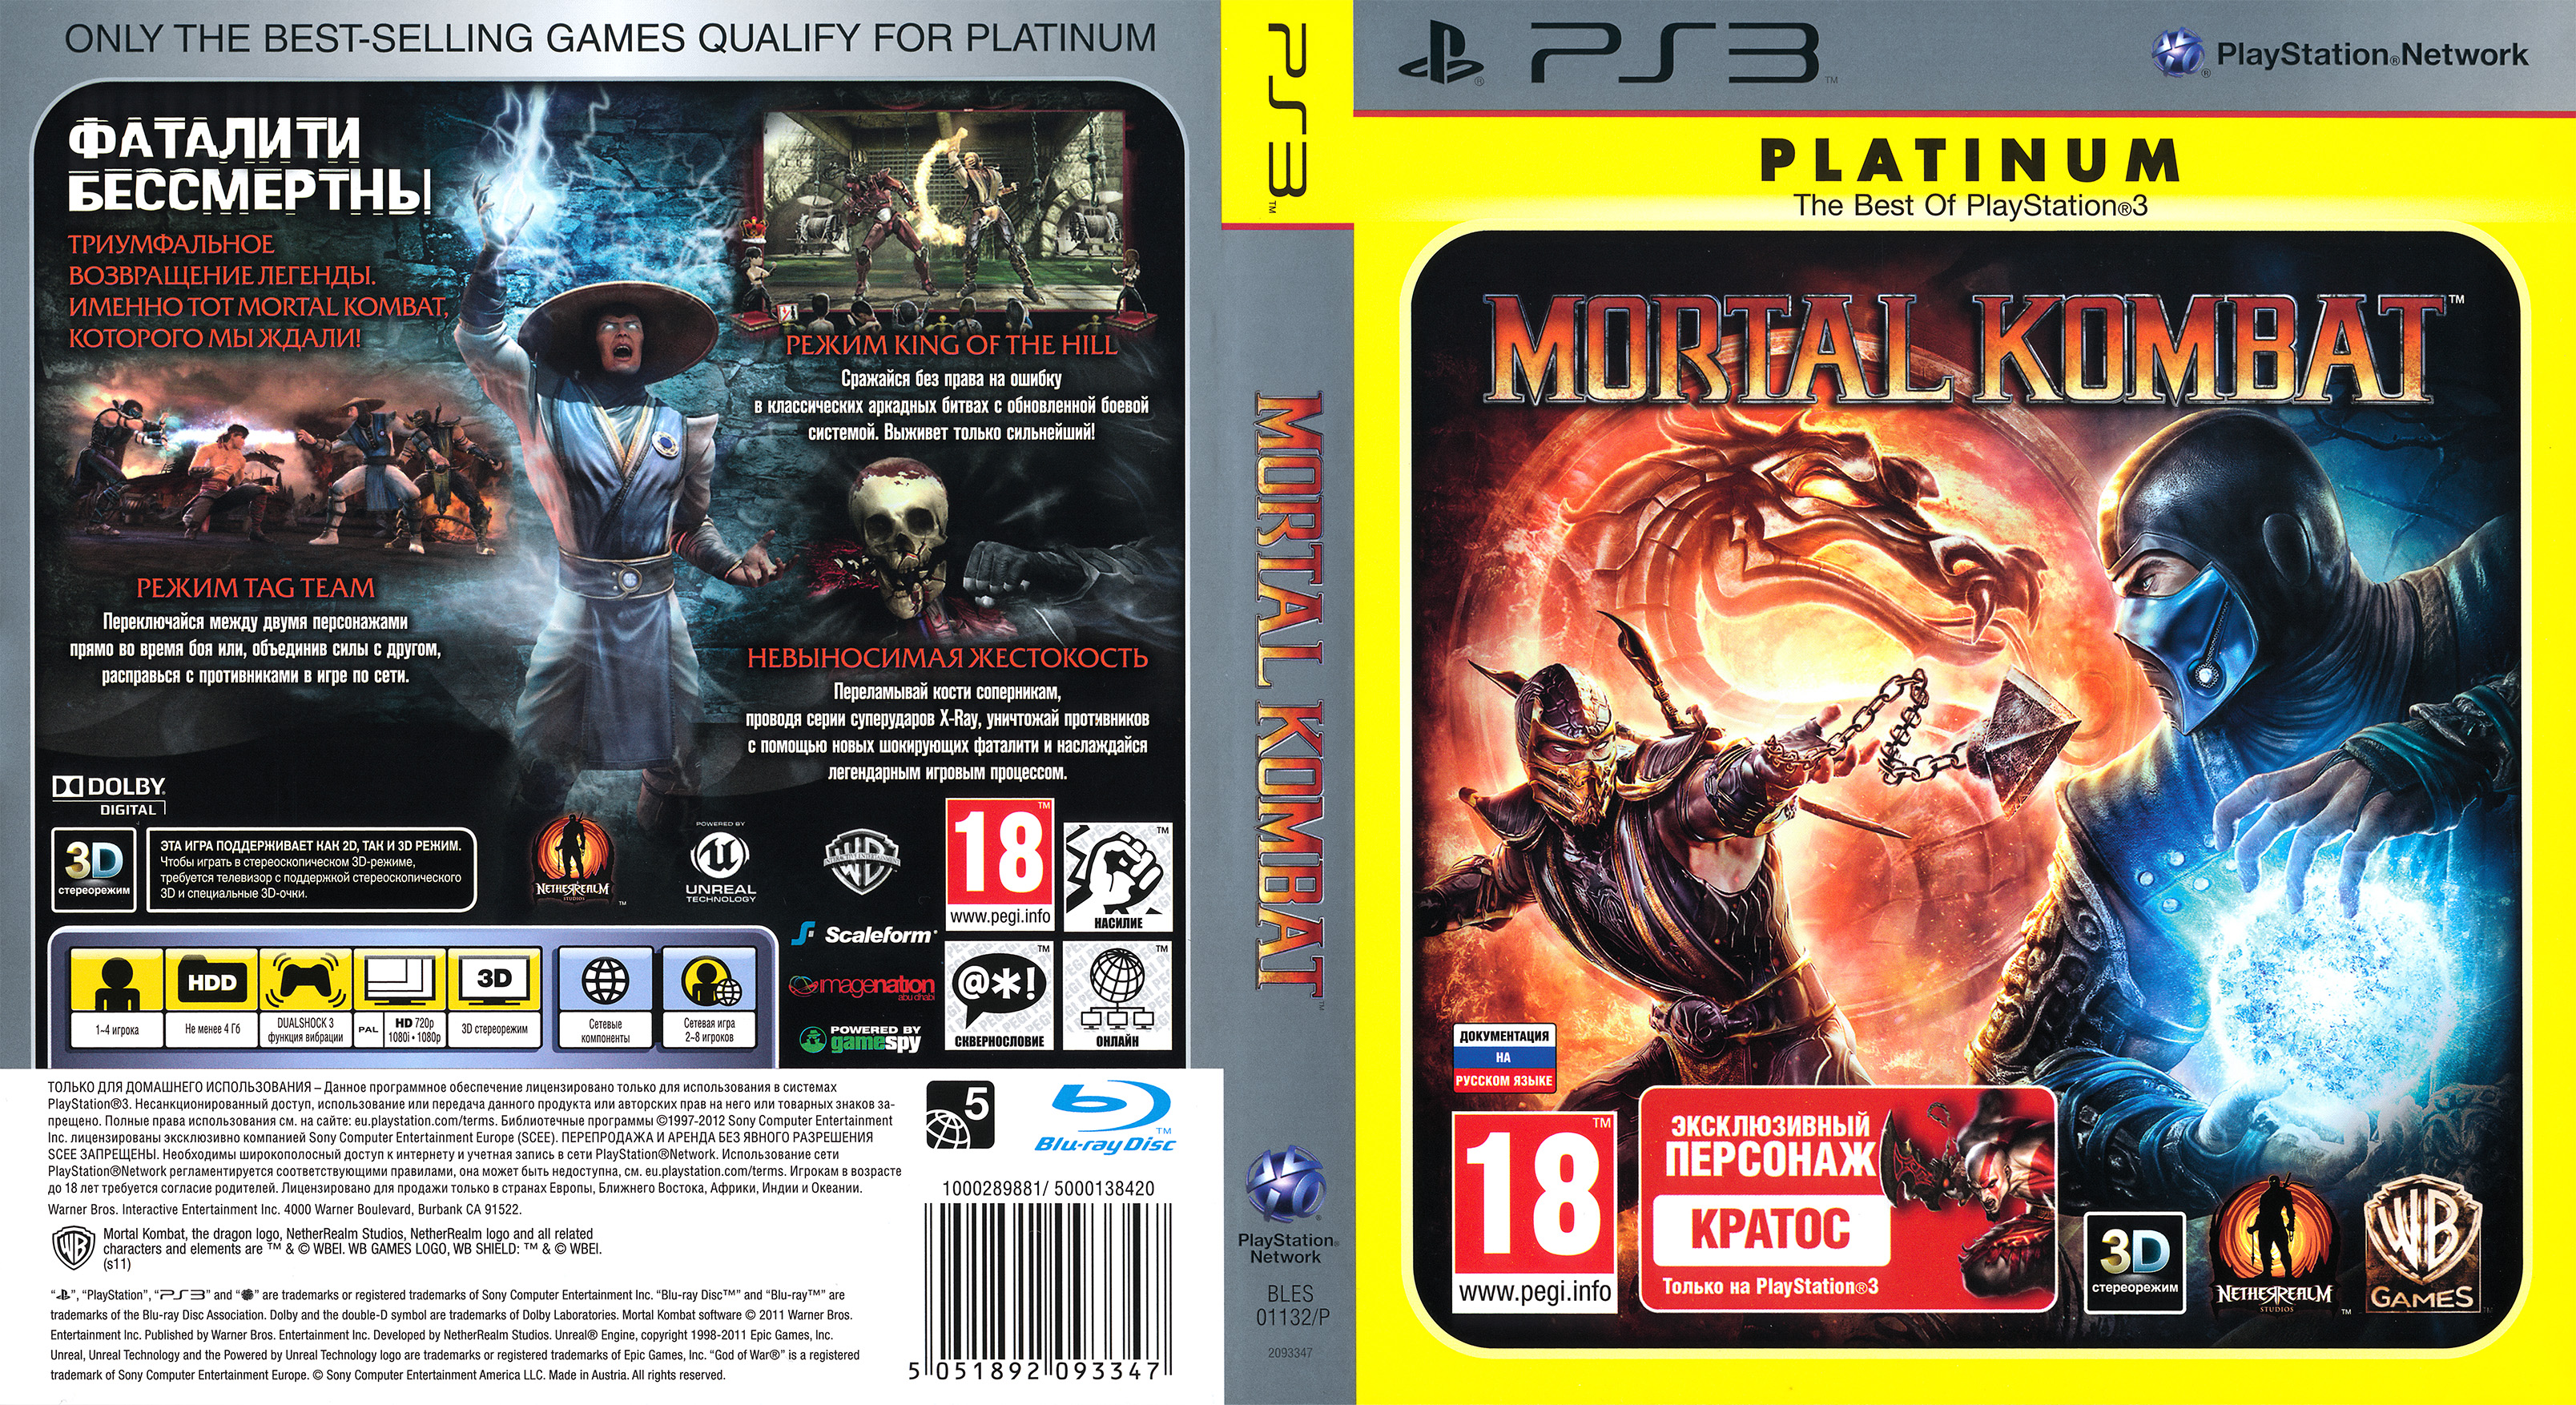 Transporte surf Melancólico Mortal Kombat (Platinum: The Best of PlayStation 3) PS3 BLES-01132/P Russia  — Complete Art Scans : Free Download, Borrow, and Streaming : Internet  Archive